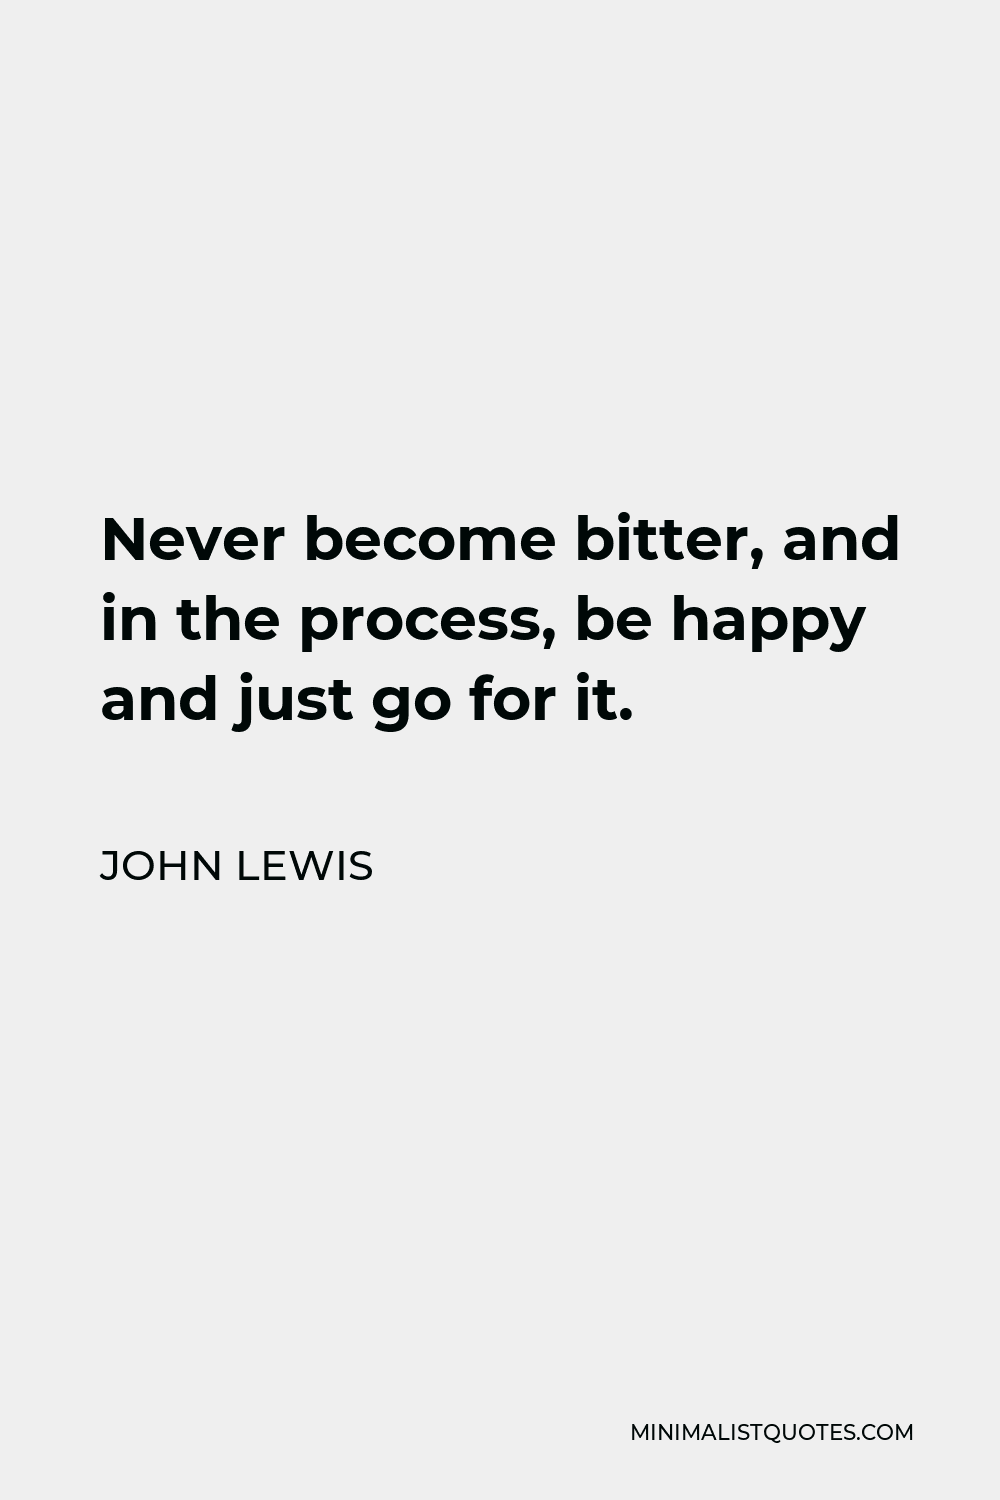 John Lewis Quote - Never become bitter, and in the process, be happy and just go for it.